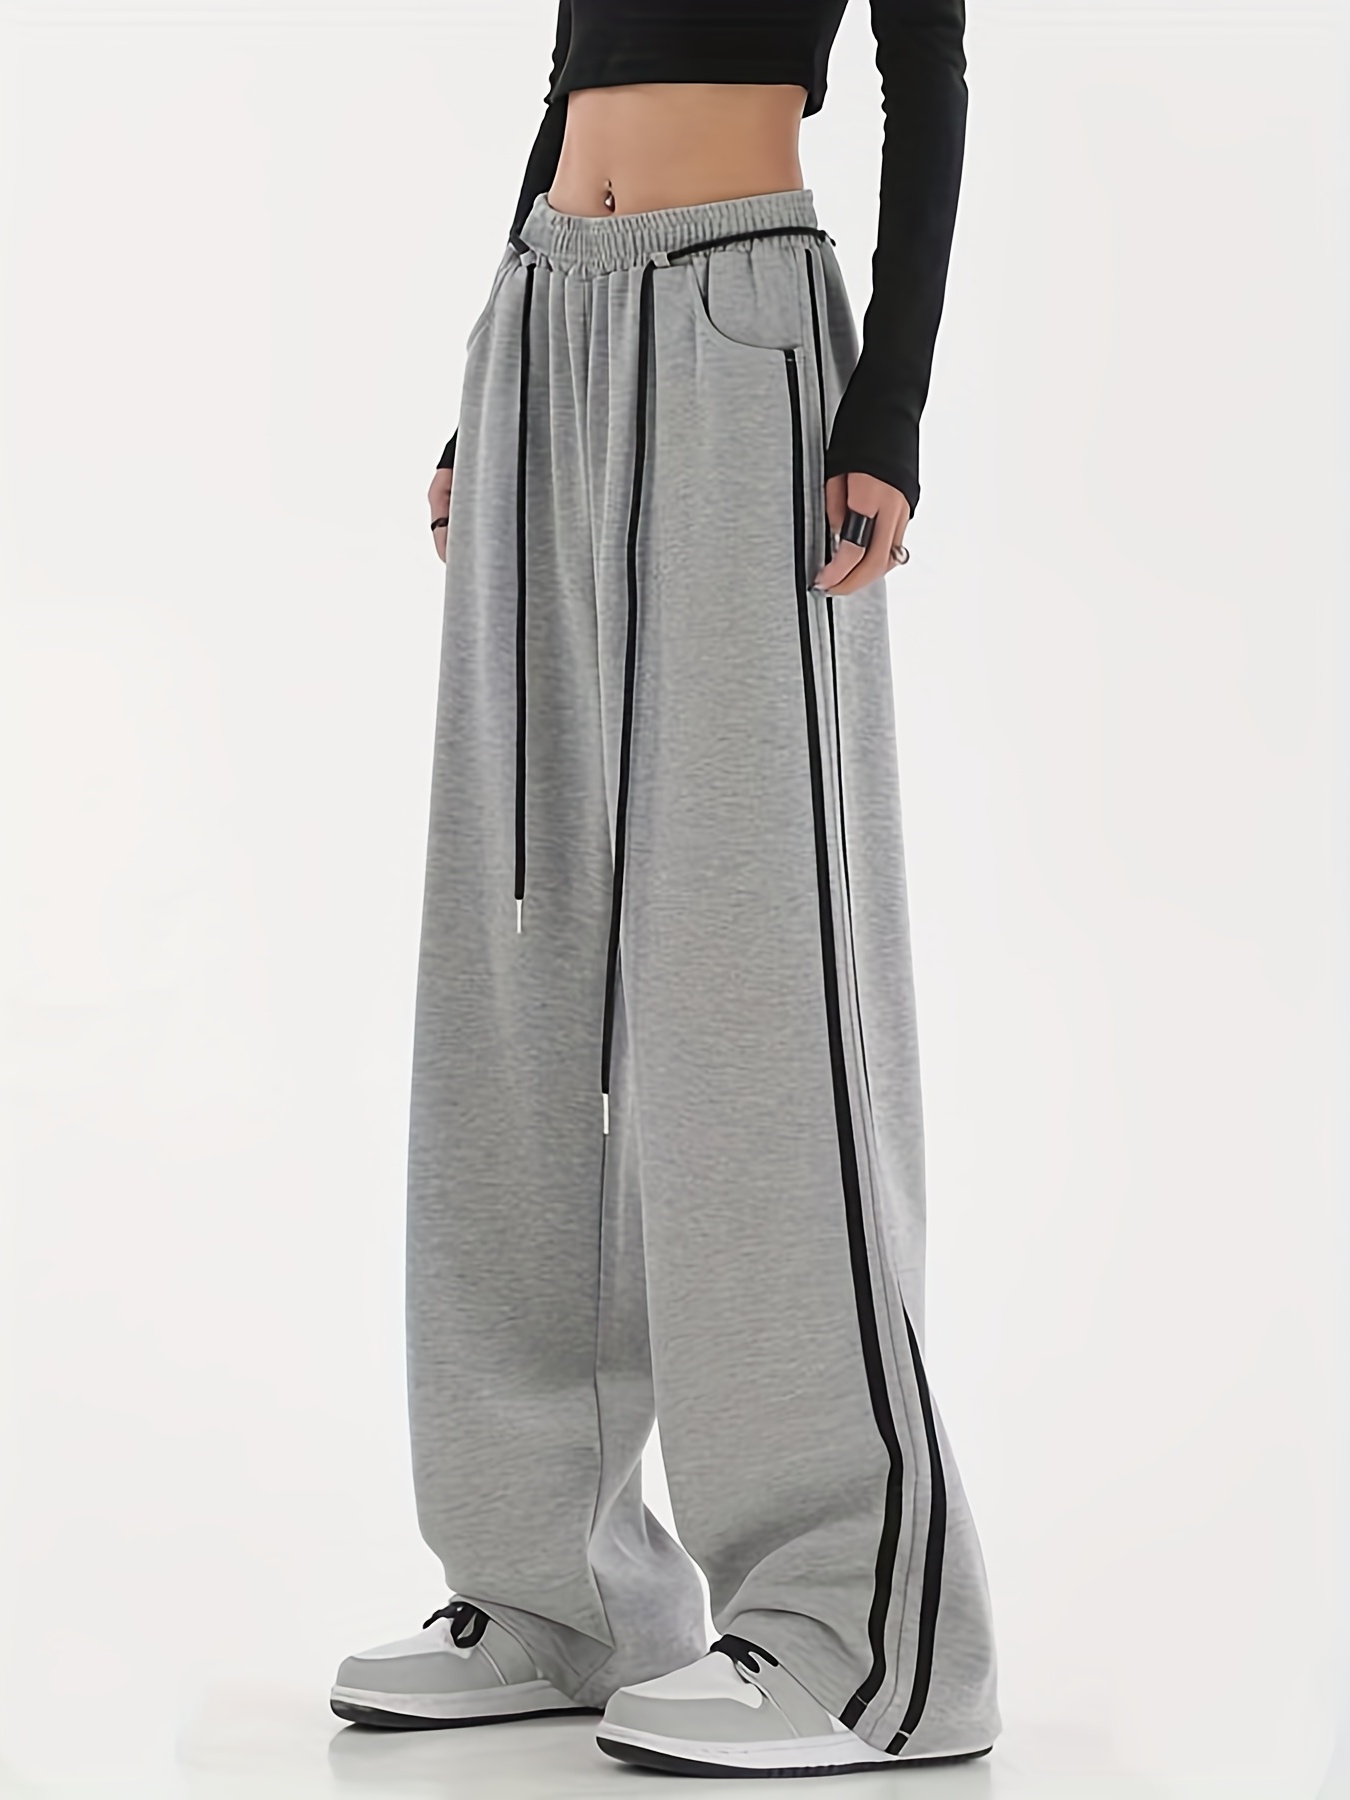 Is That The New Solid Knot Flare Leg Sweatpants ??